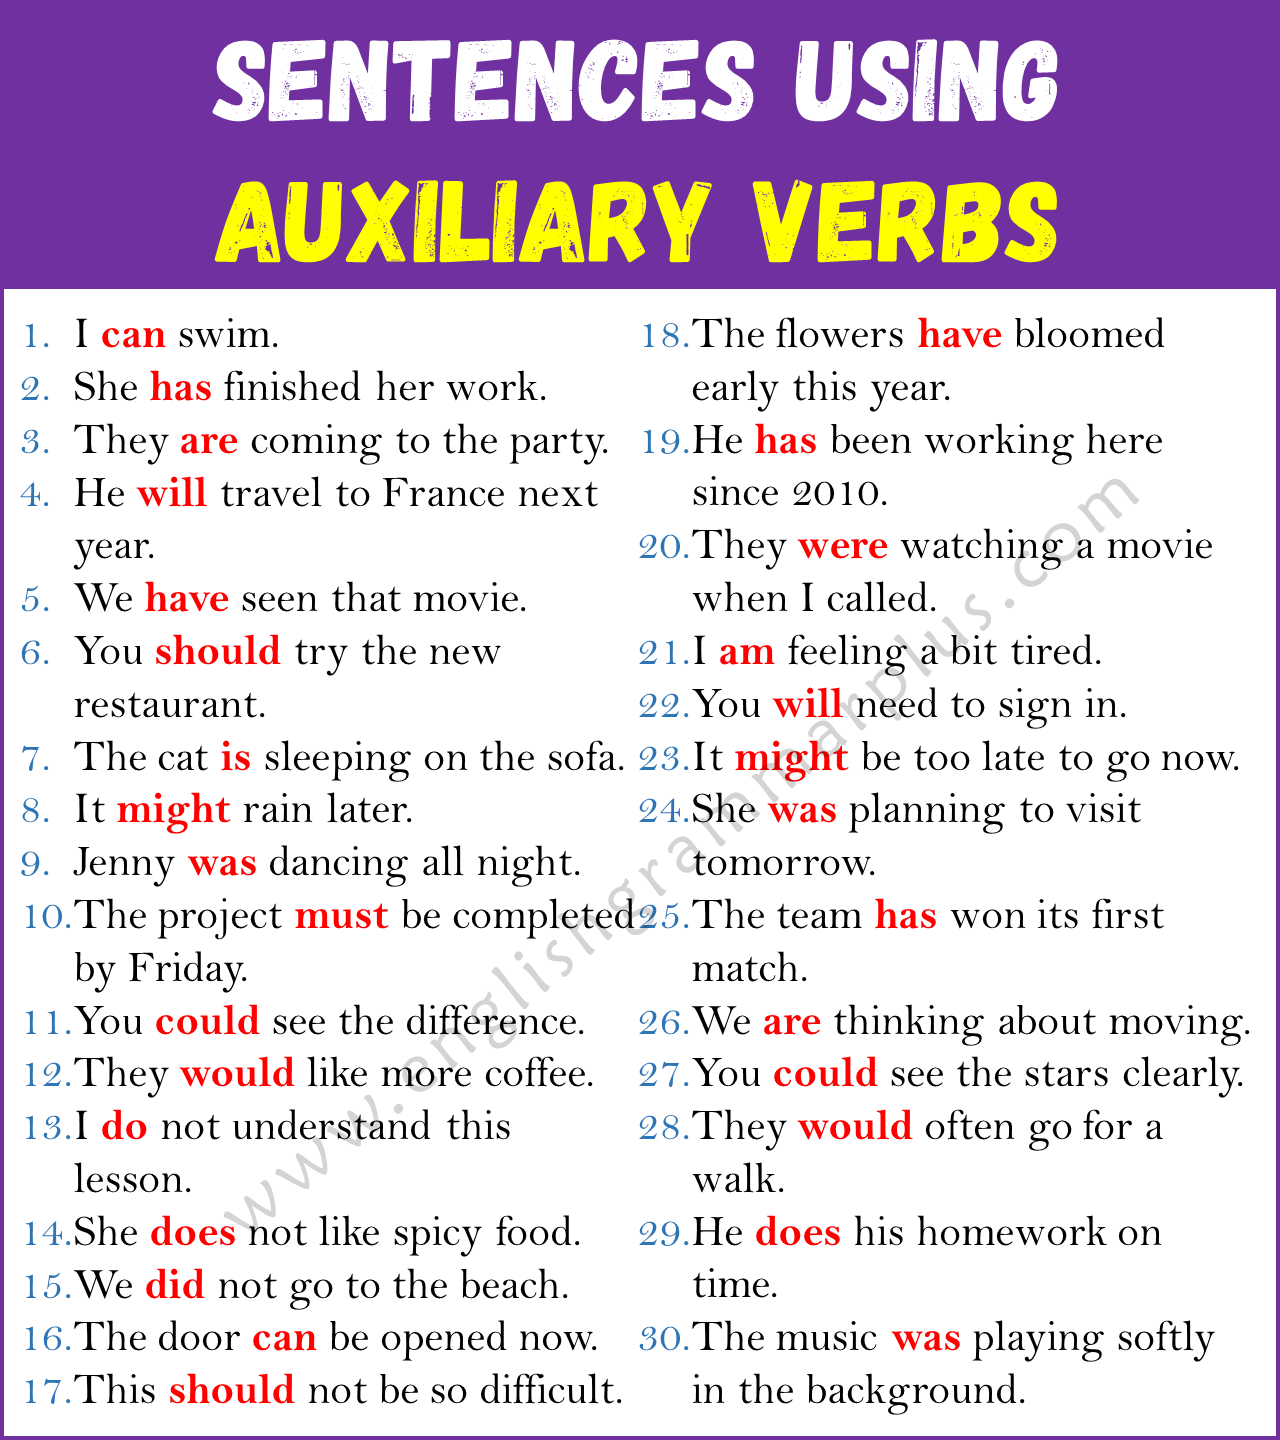 Examples of Auxiliary Verbs in Sentences